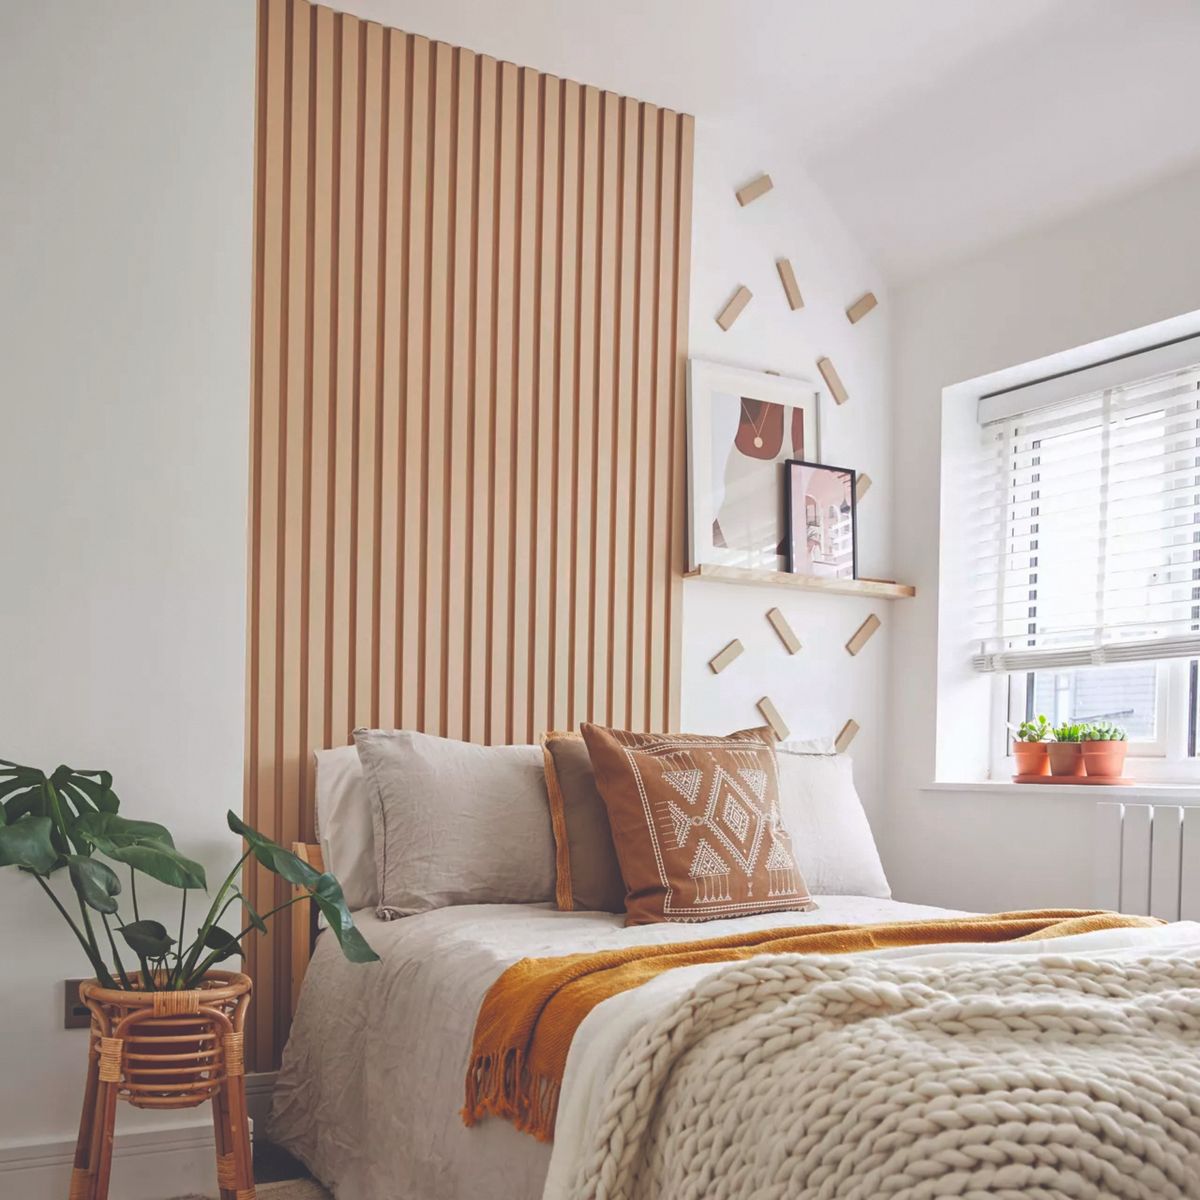 10 small bedroom decor ideas to get the most out of your bedroom